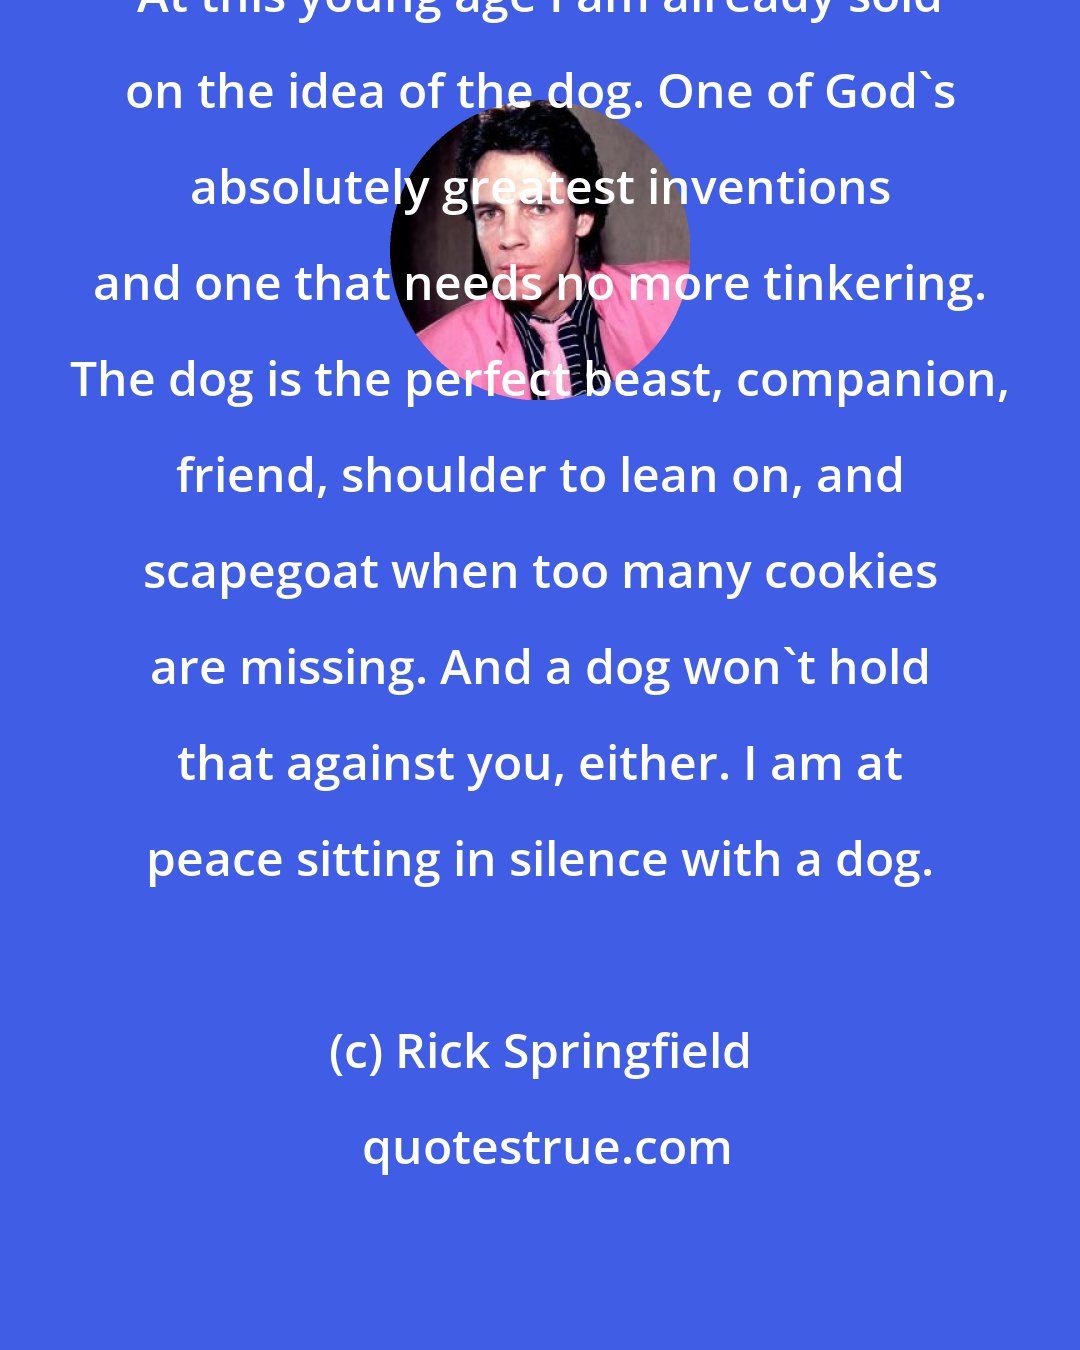 Rick Springfield: At this young age I am already sold on the idea of the dog. One of God's absolutely greatest inventions and one that needs no more tinkering. The dog is the perfect beast, companion, friend, shoulder to lean on, and scapegoat when too many cookies are missing. And a dog won't hold that against you, either. I am at peace sitting in silence with a dog.